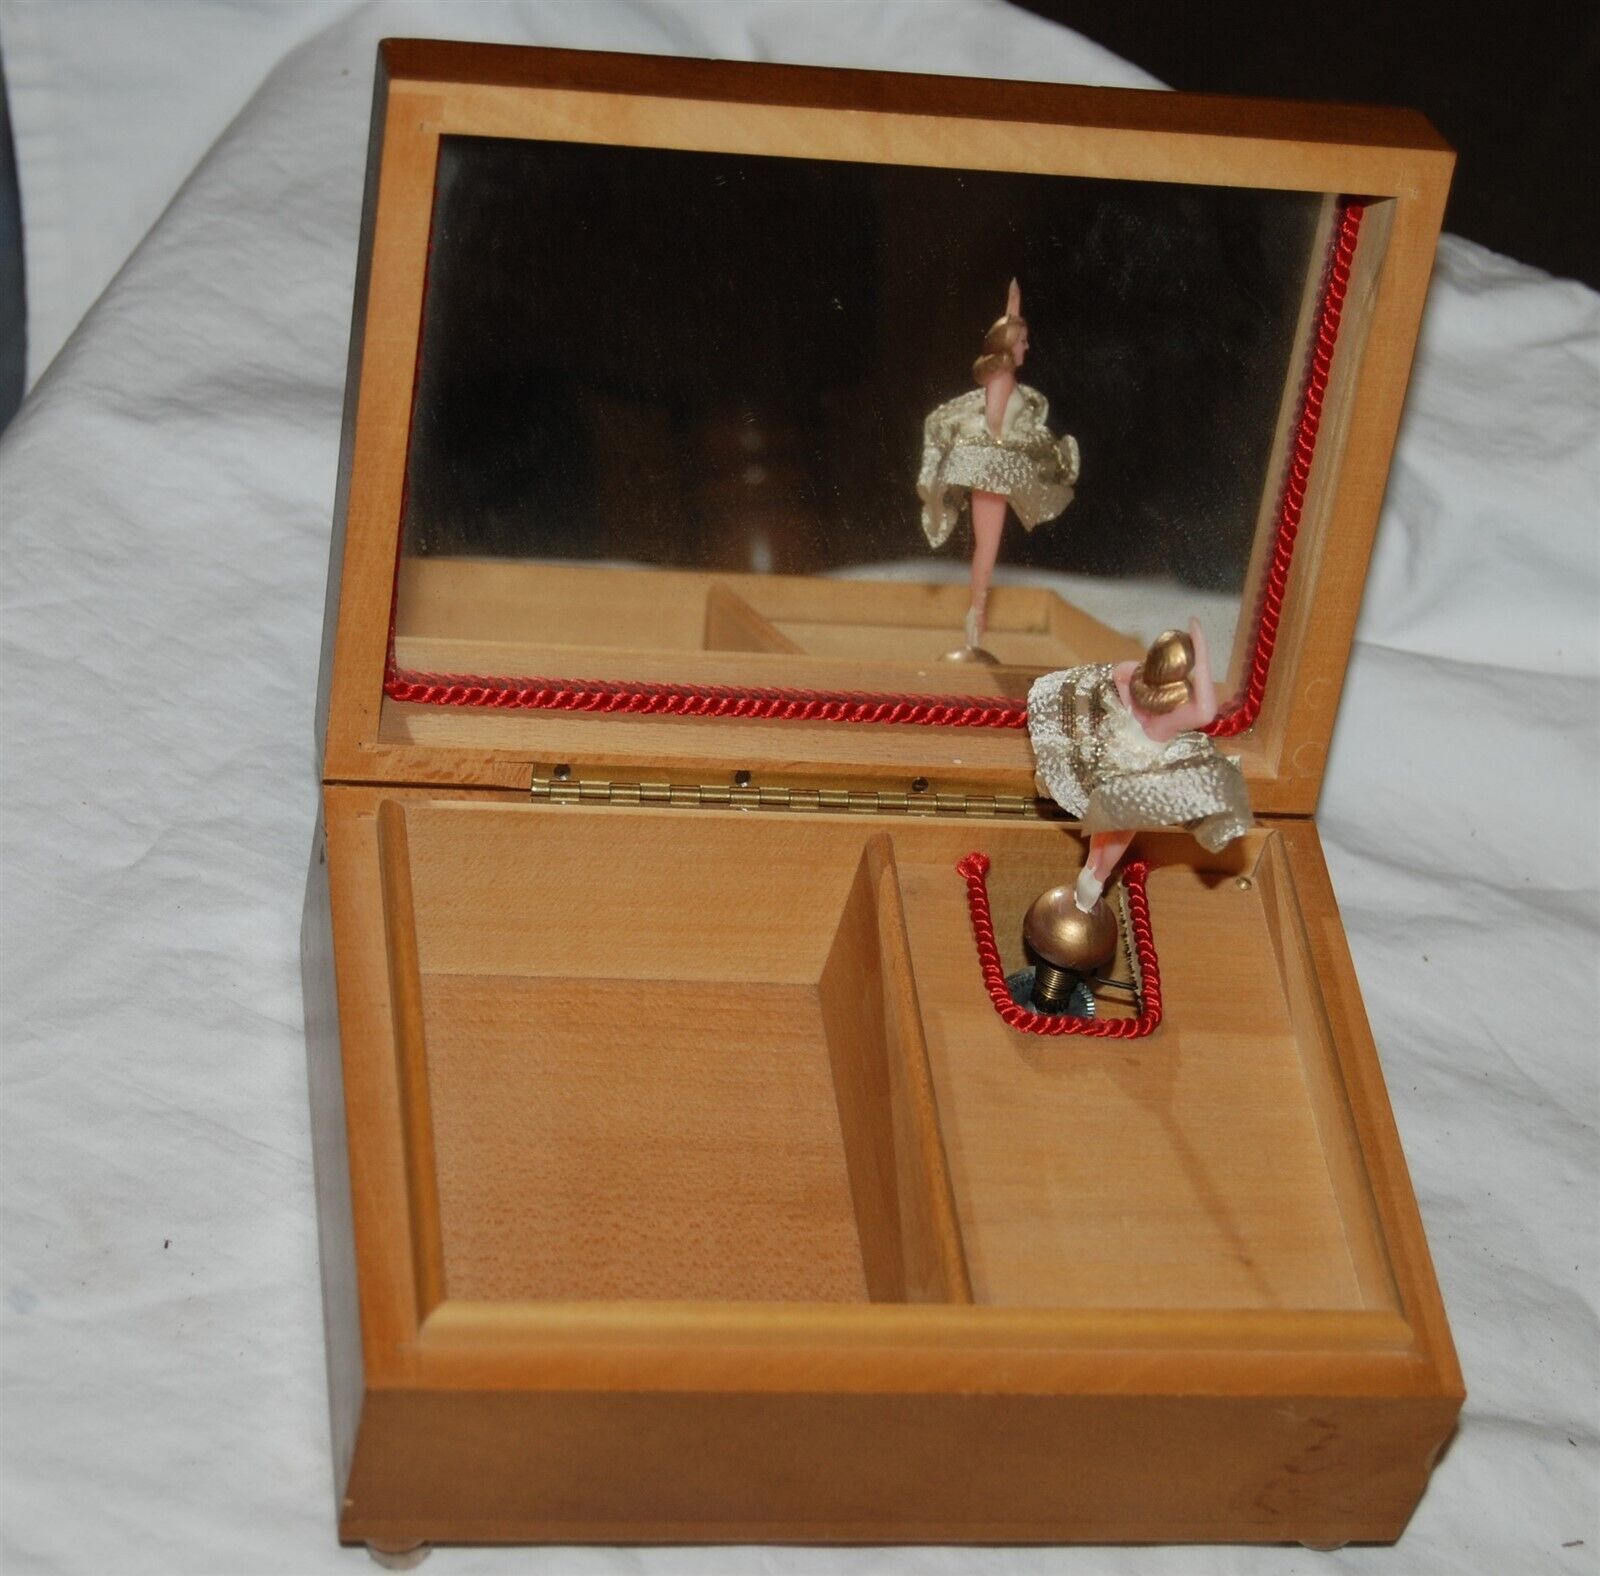 Vintage Swiss music box with moving ballerina play Edelweis 6.5